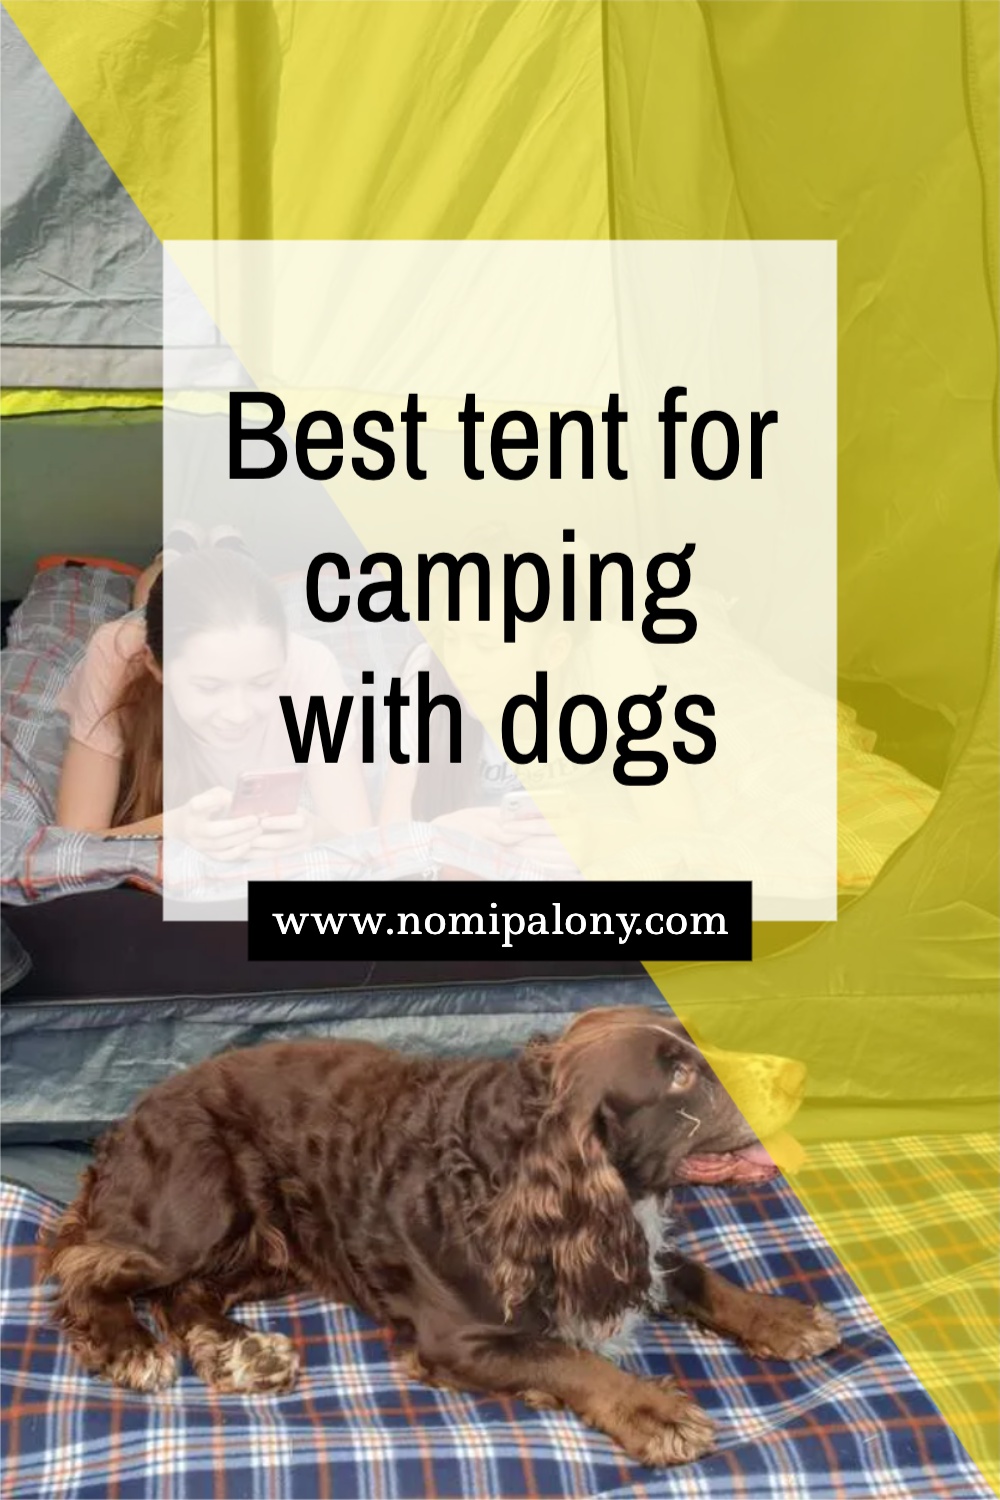 Here is everything you need to know about choosing the best tent for camping with dogs, including our top picks.